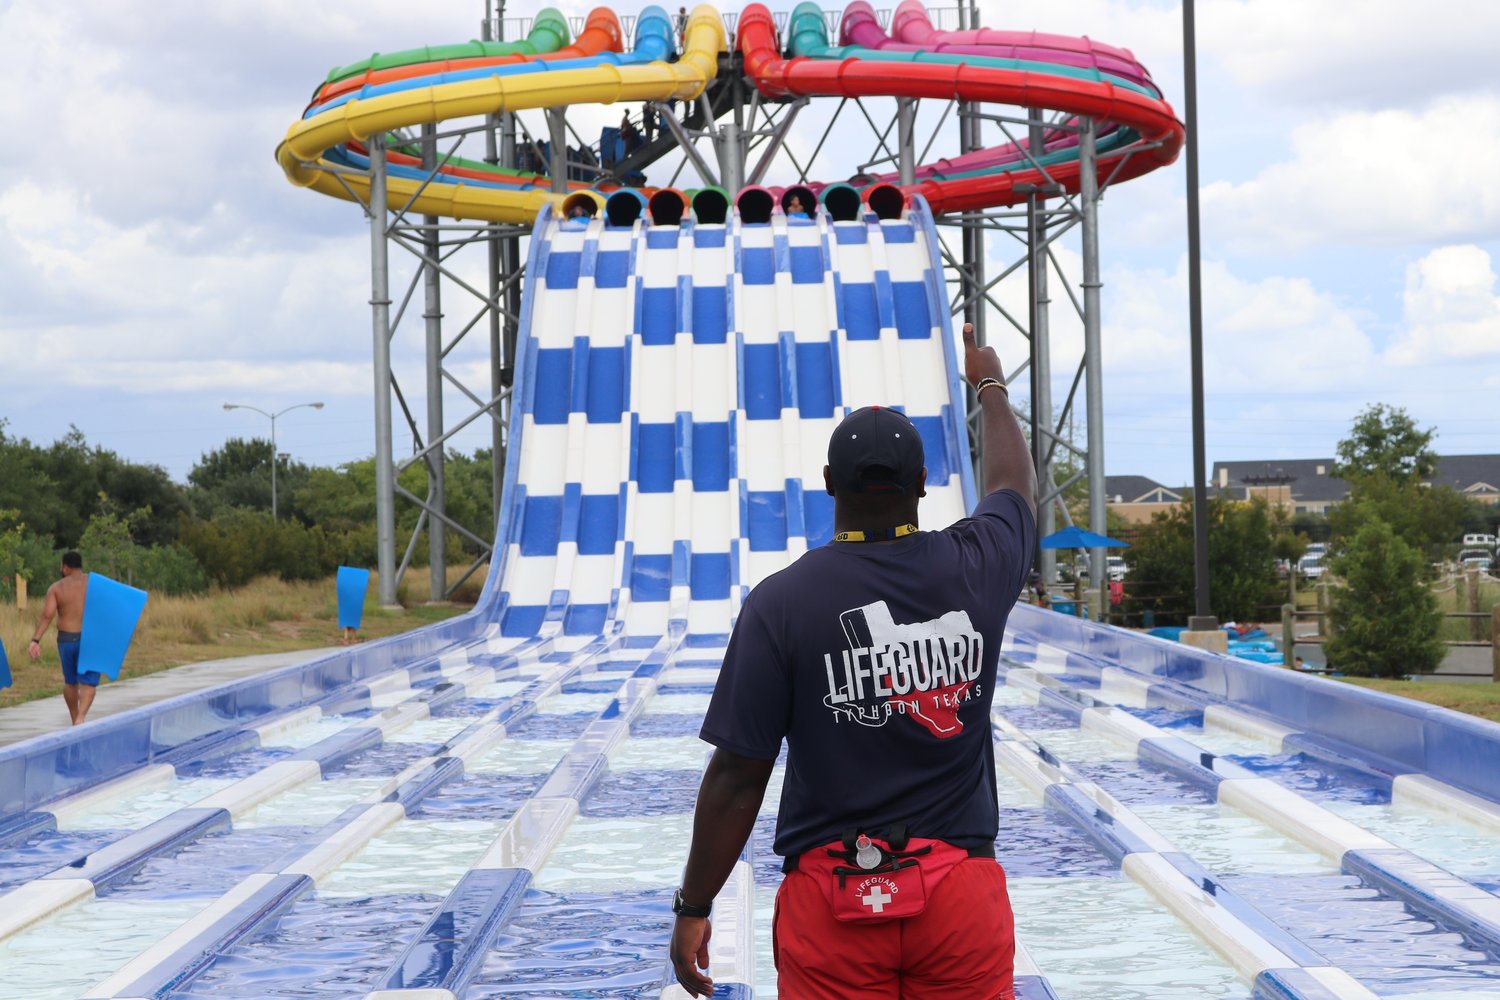 Typhoon Texas has announced that the waterpark is hiring for 1,000 summer positions.